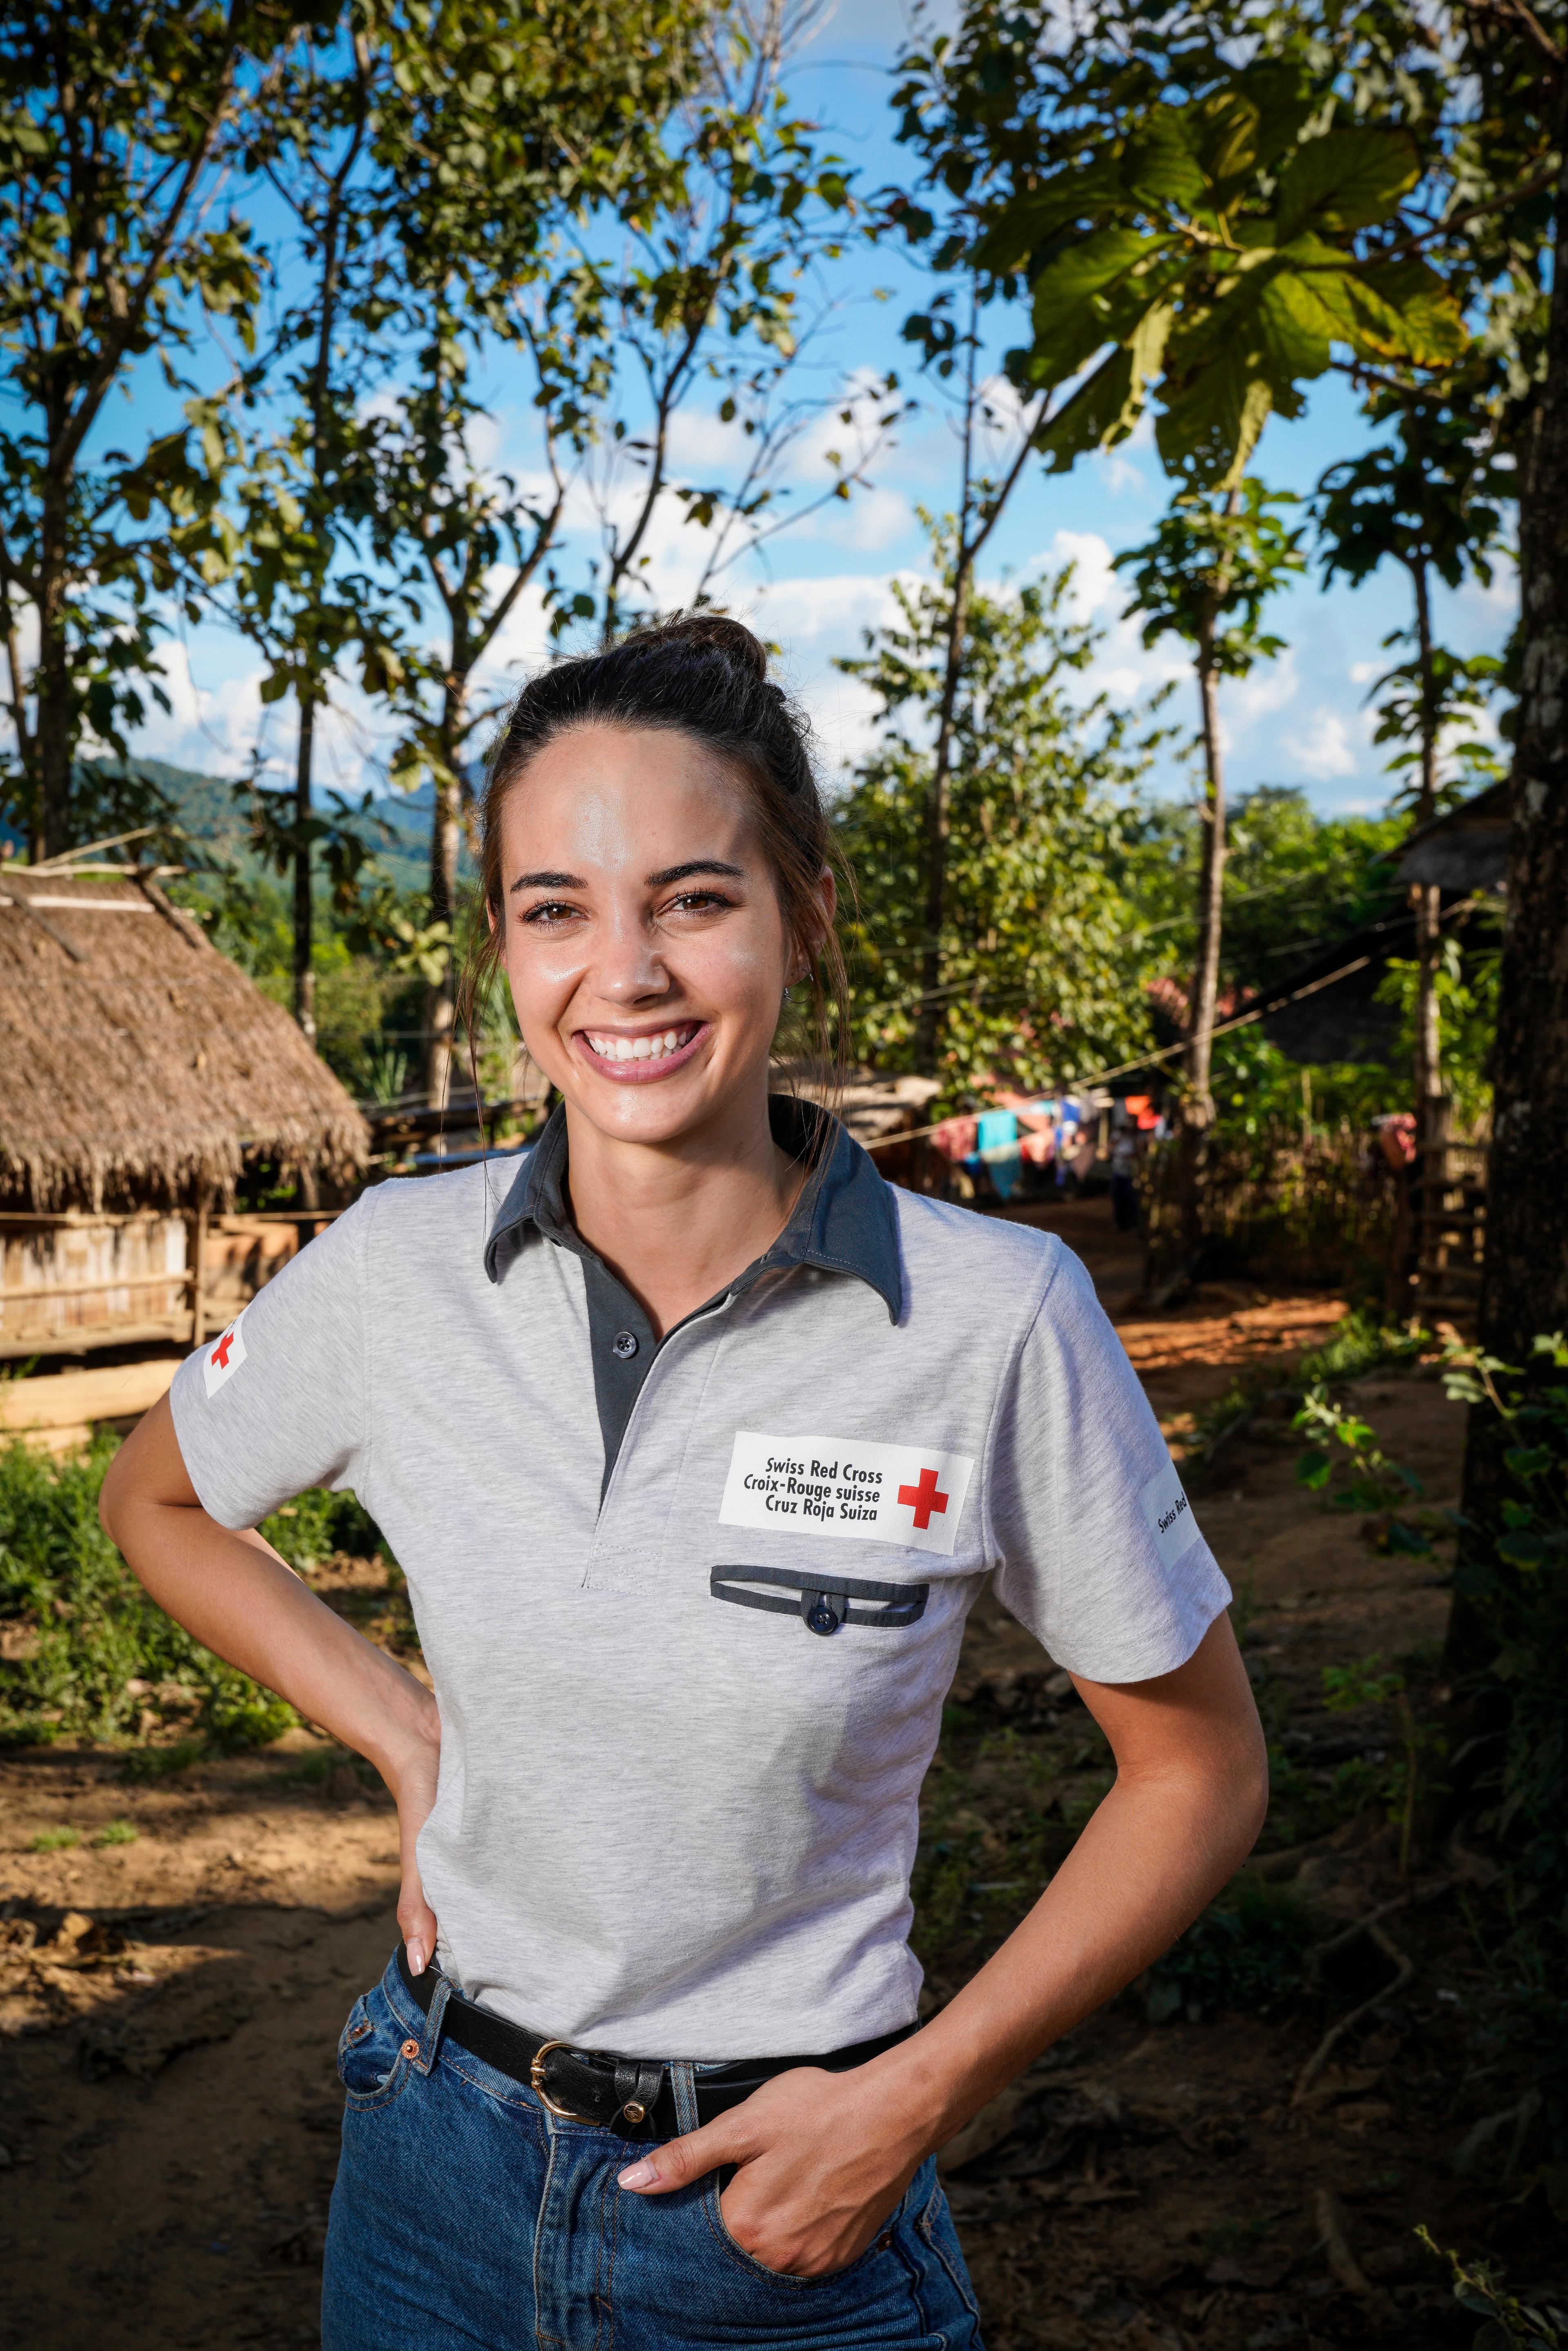 Laetitia in front of a village in a polo shirt of the SRC.